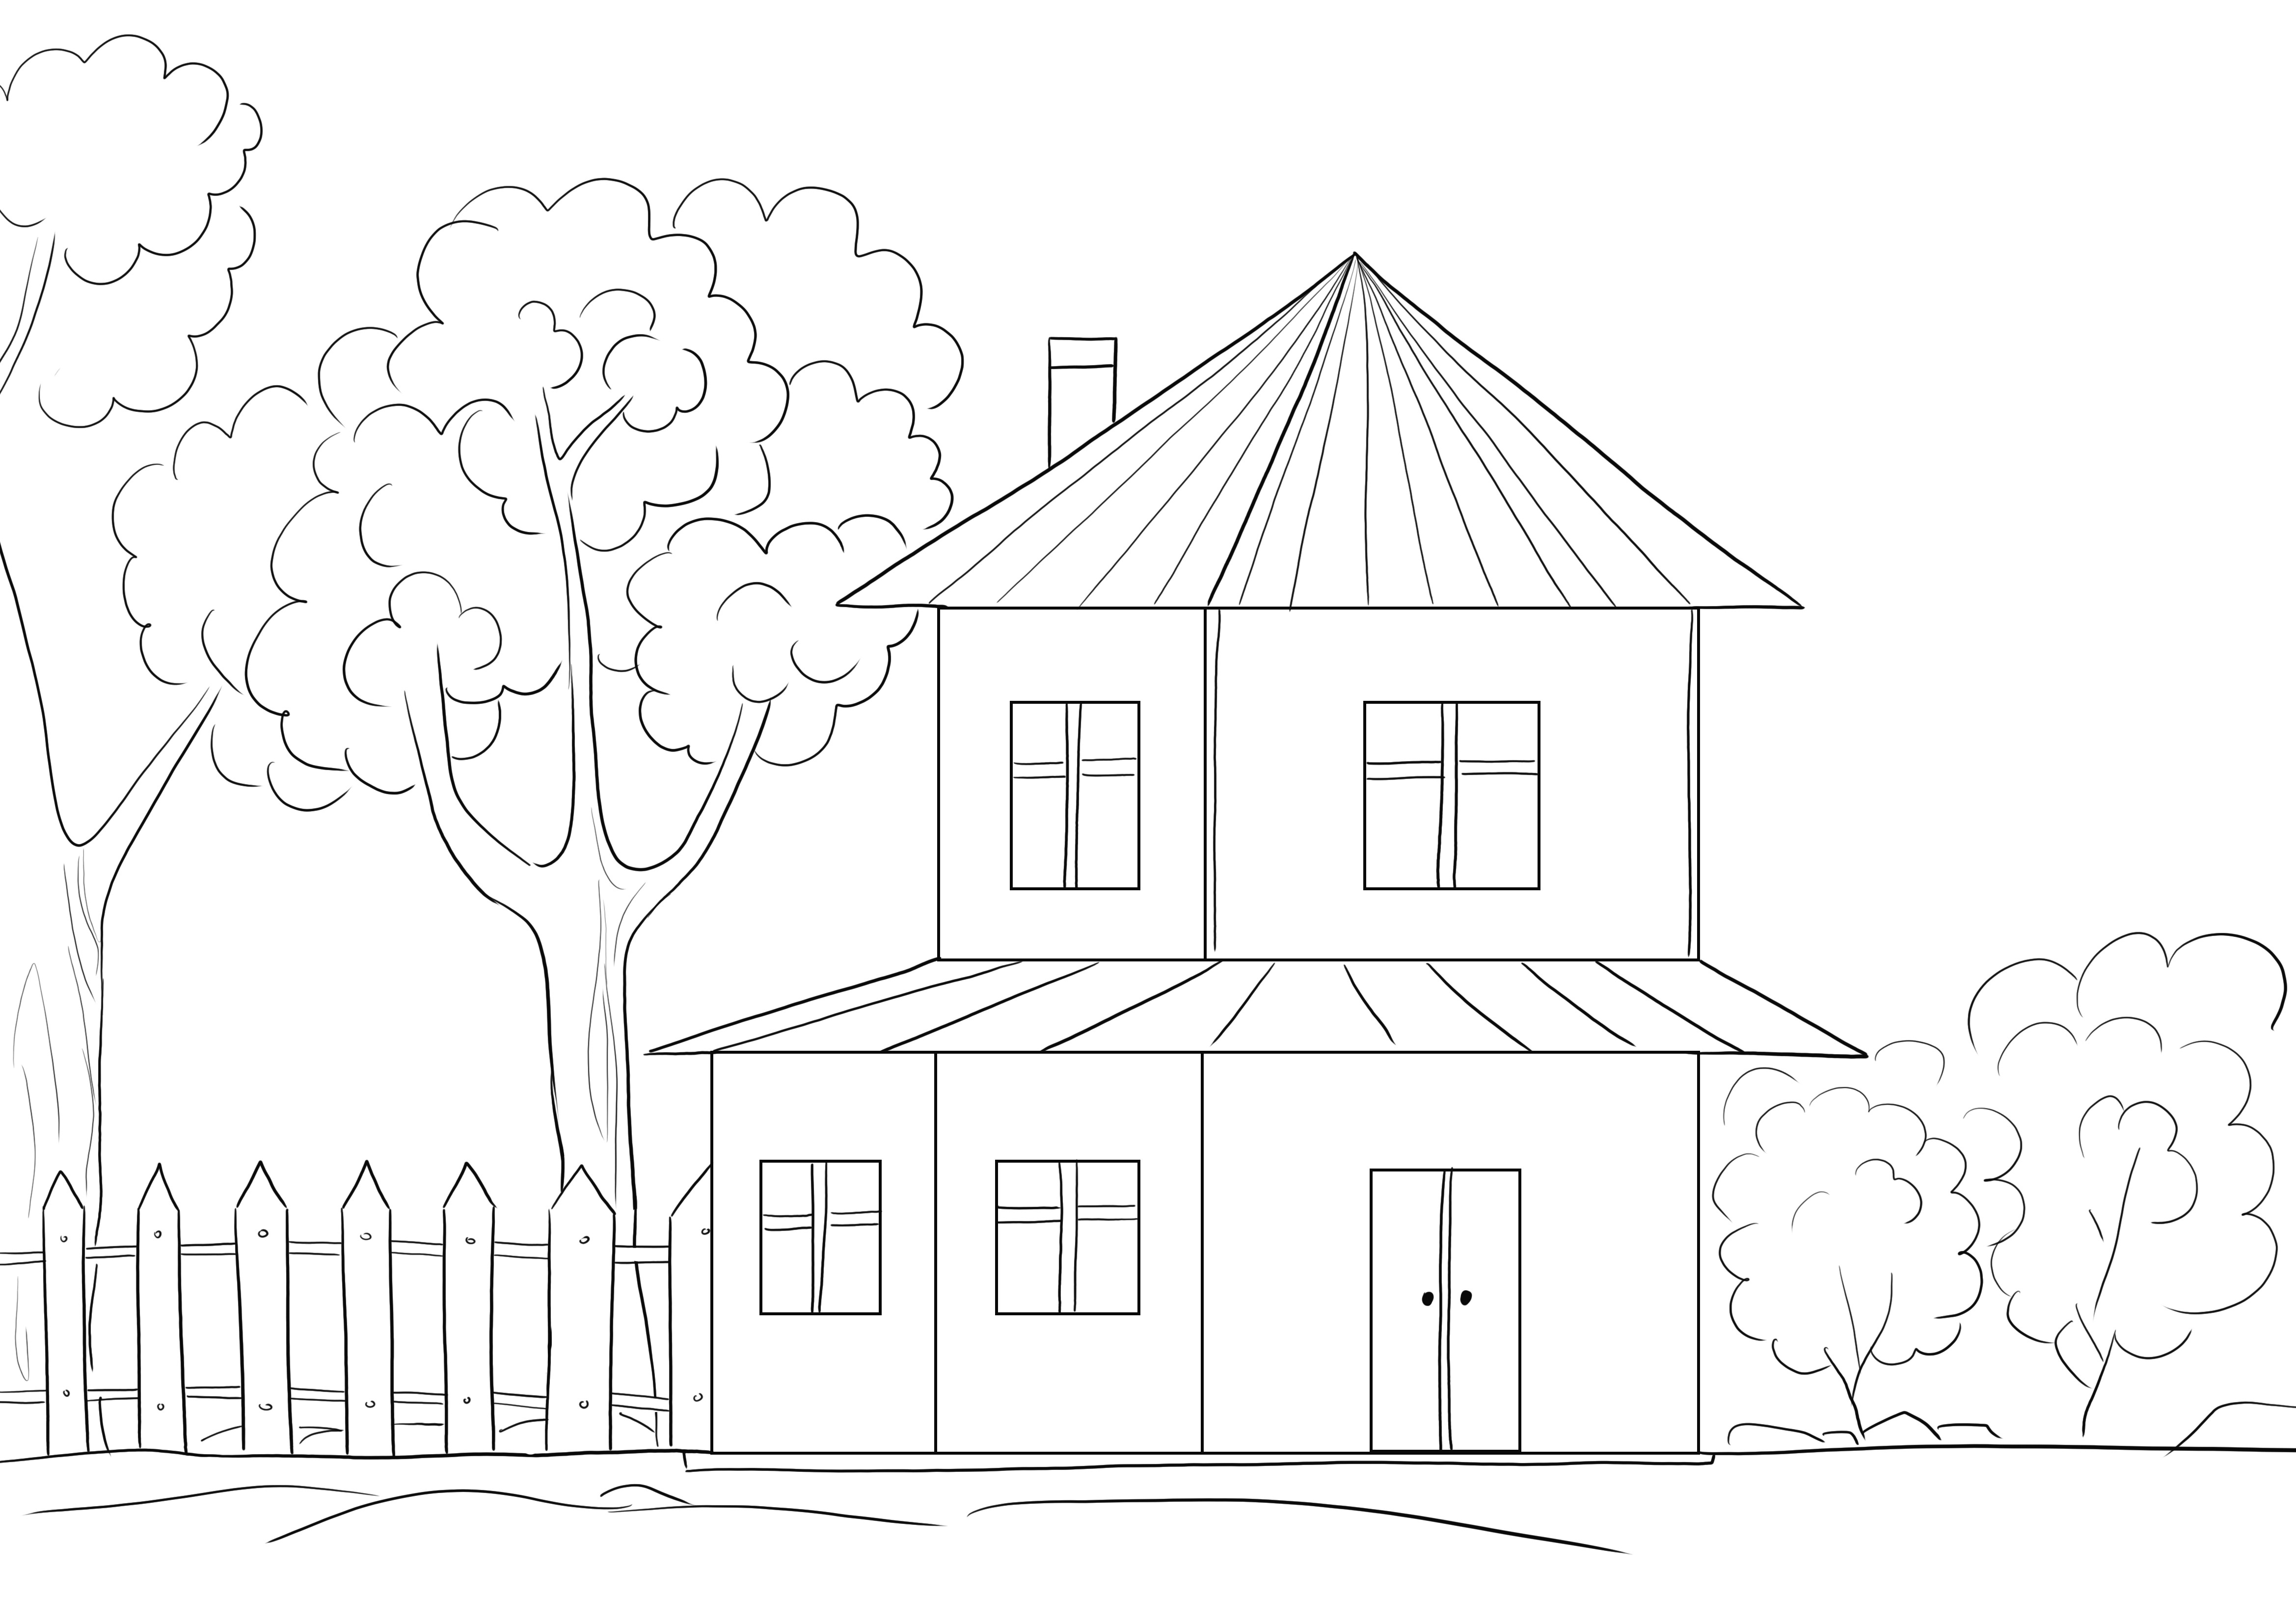 Easy coloring of a House with Garden printing for free image